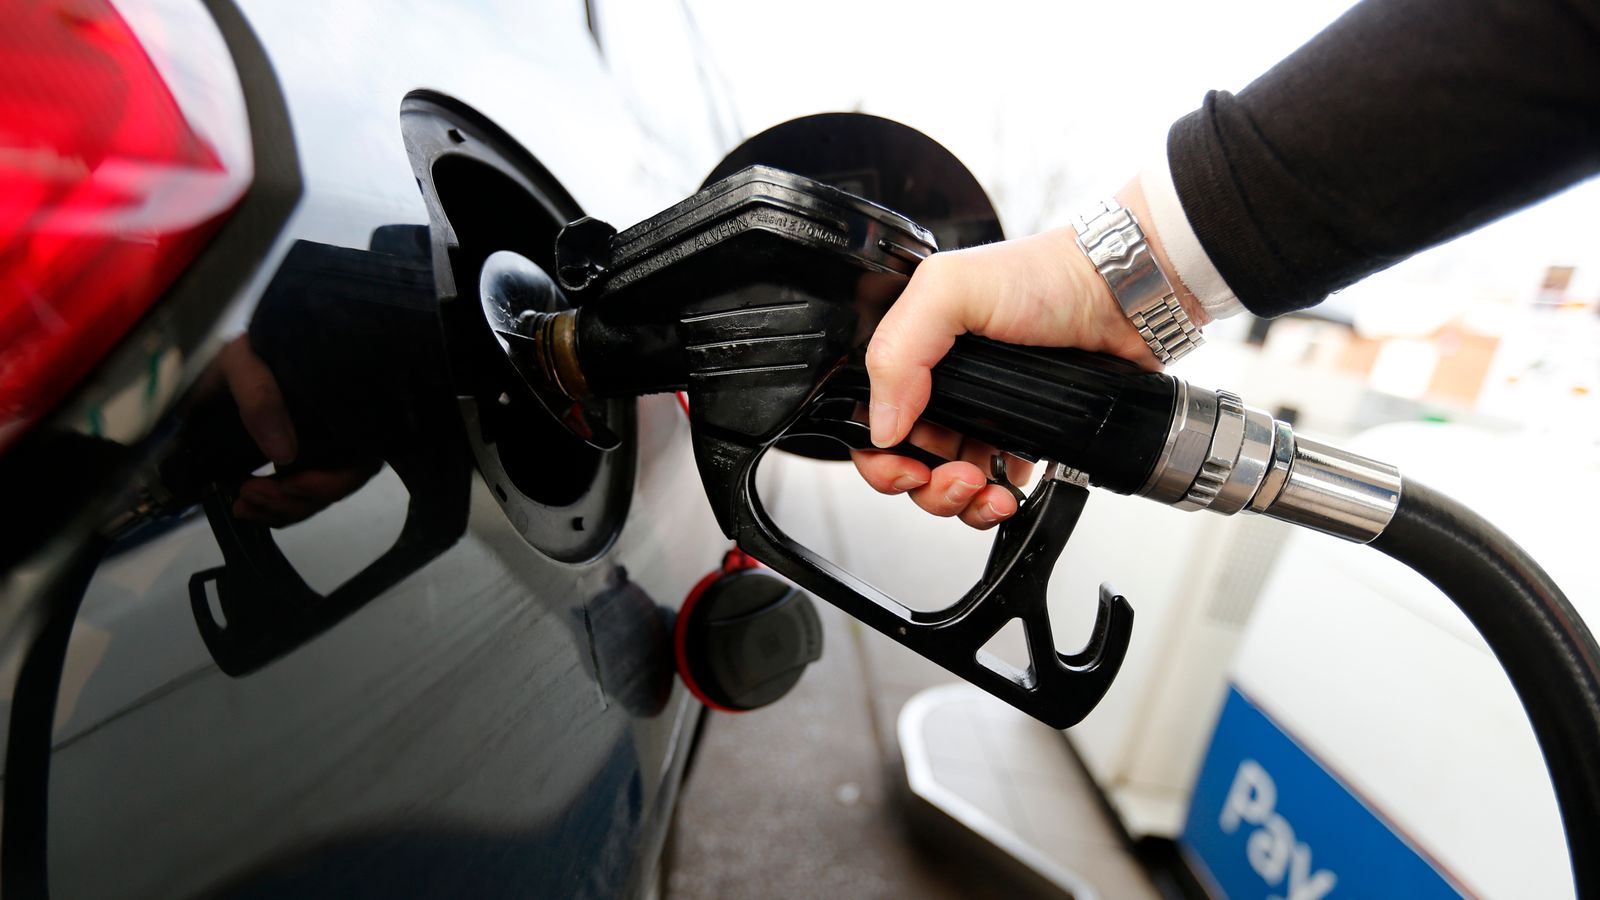 Diesel 'rip-off' as wholesale prices cheaper than petrol for over a month, RAC says